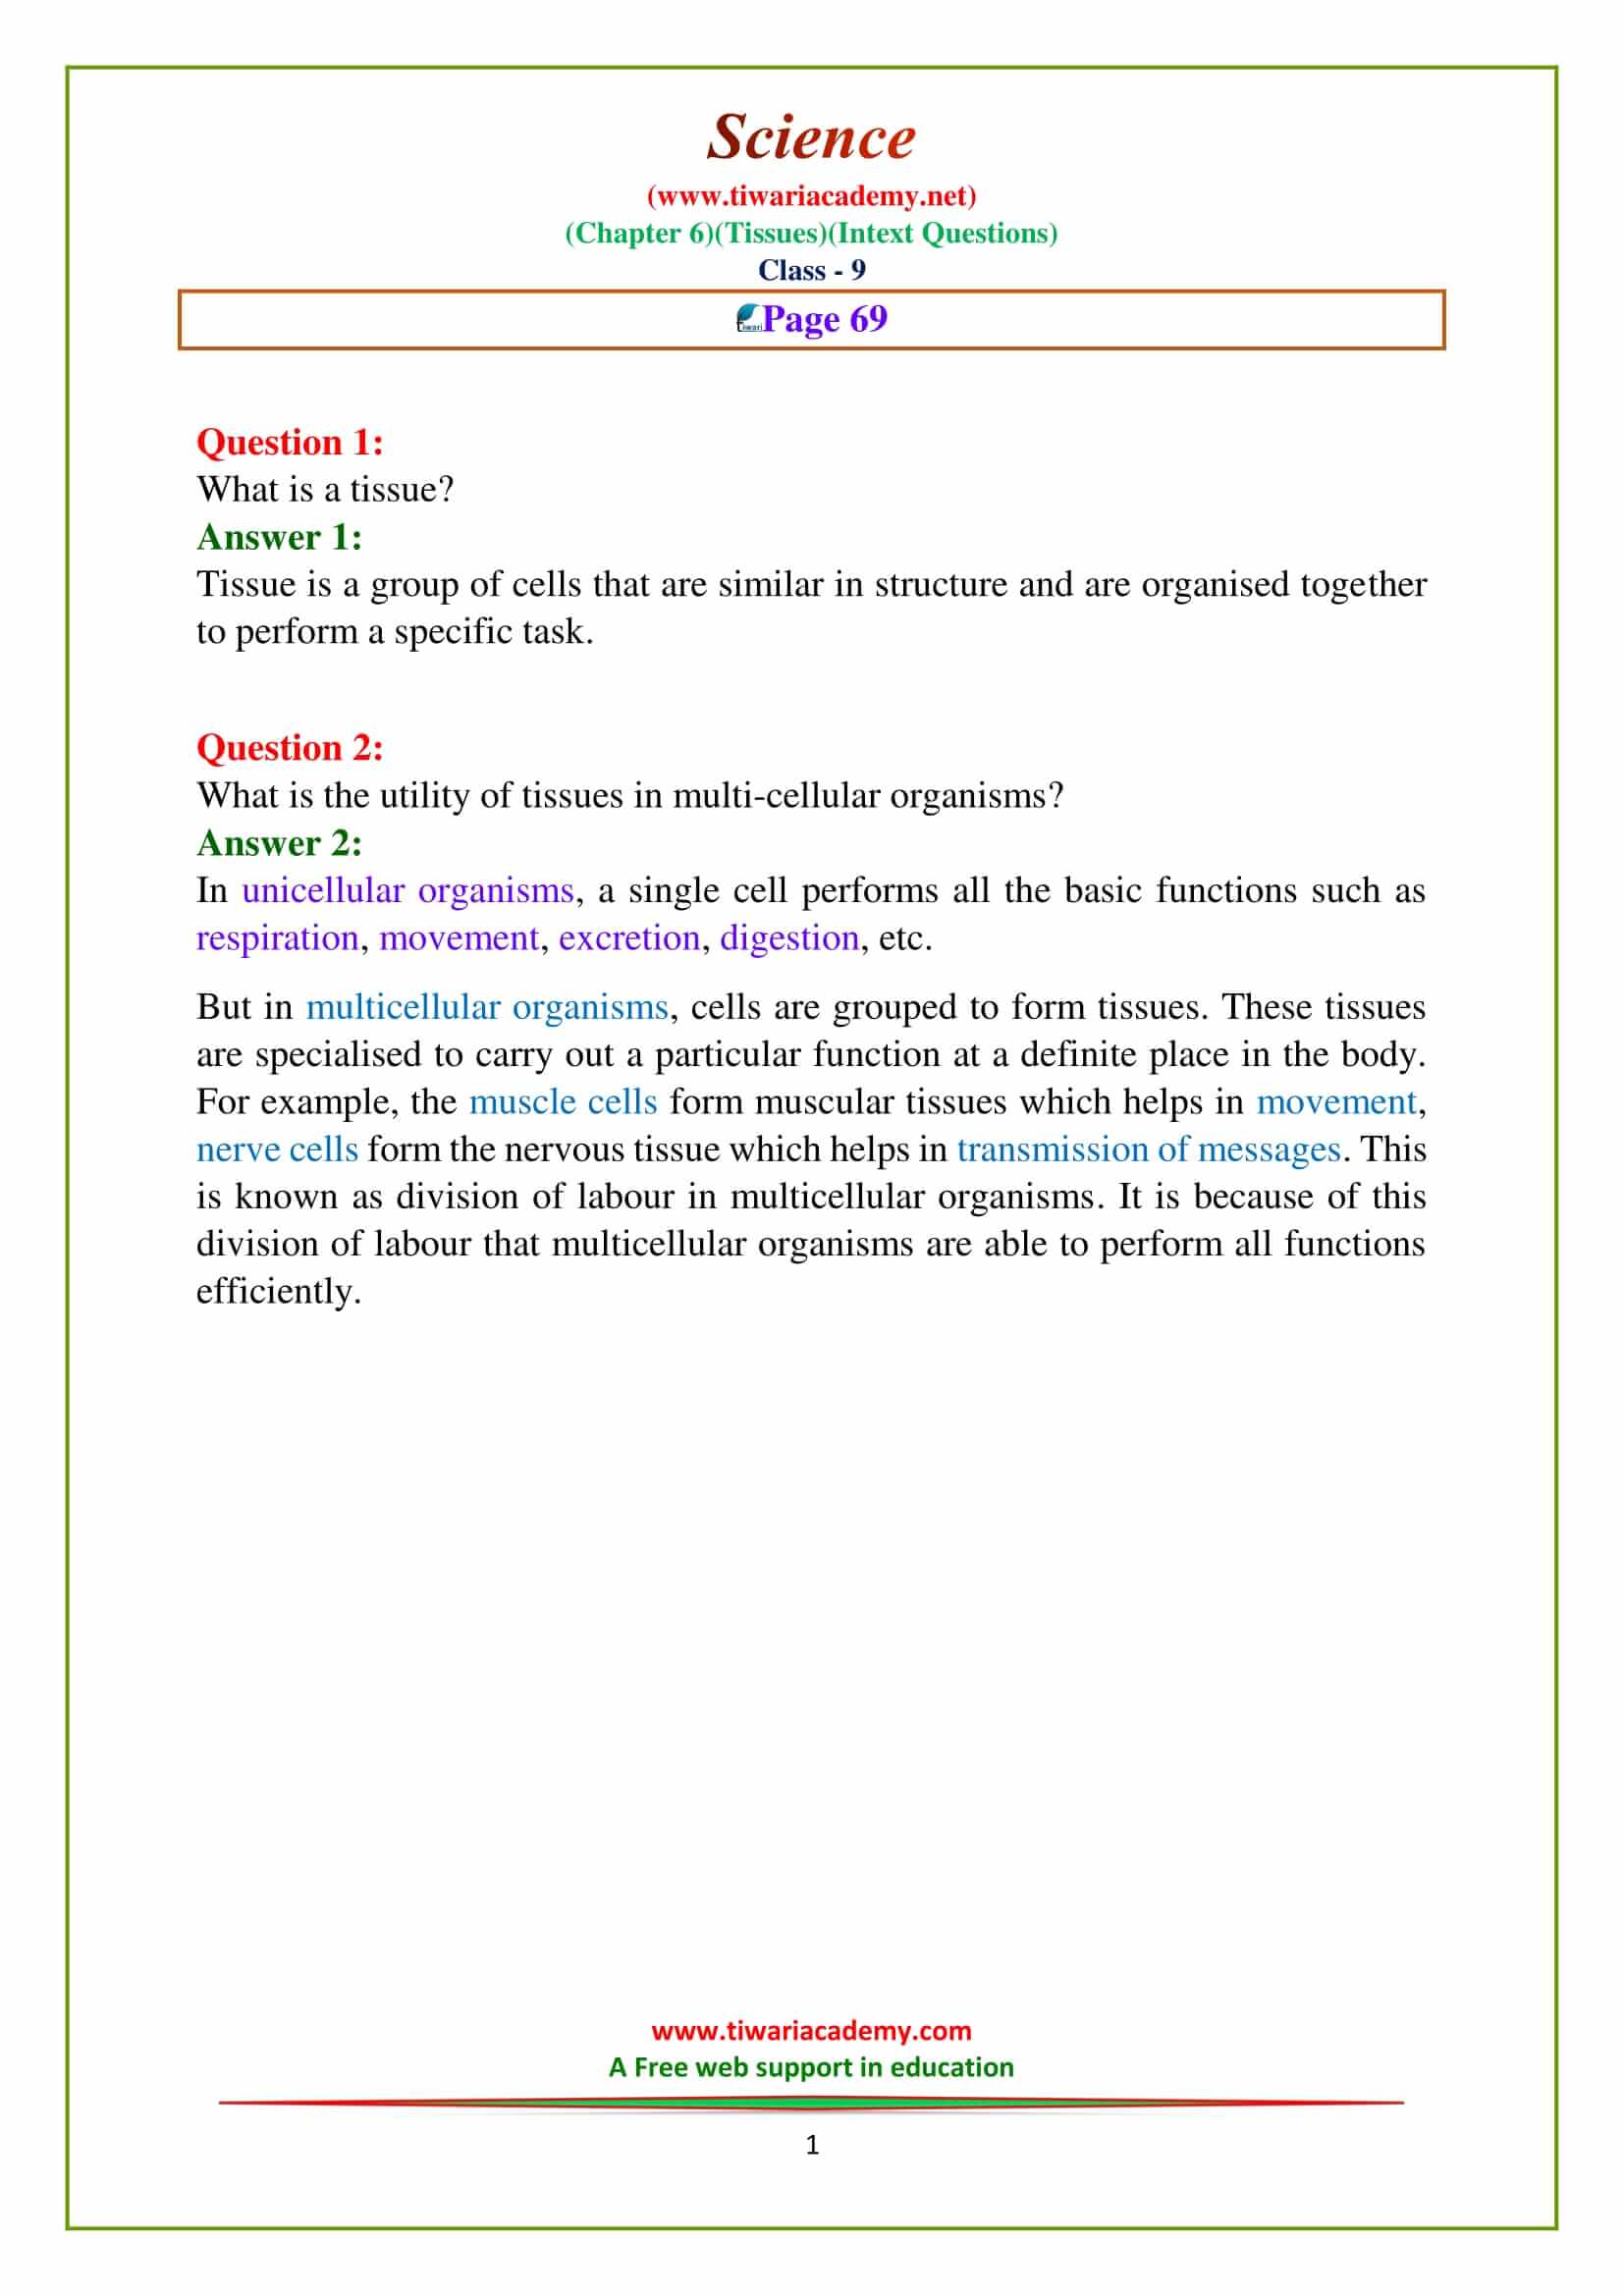 NCERT Solutions for Class 9 Science Chapter 6 Tissues Intext Questions of Page 69